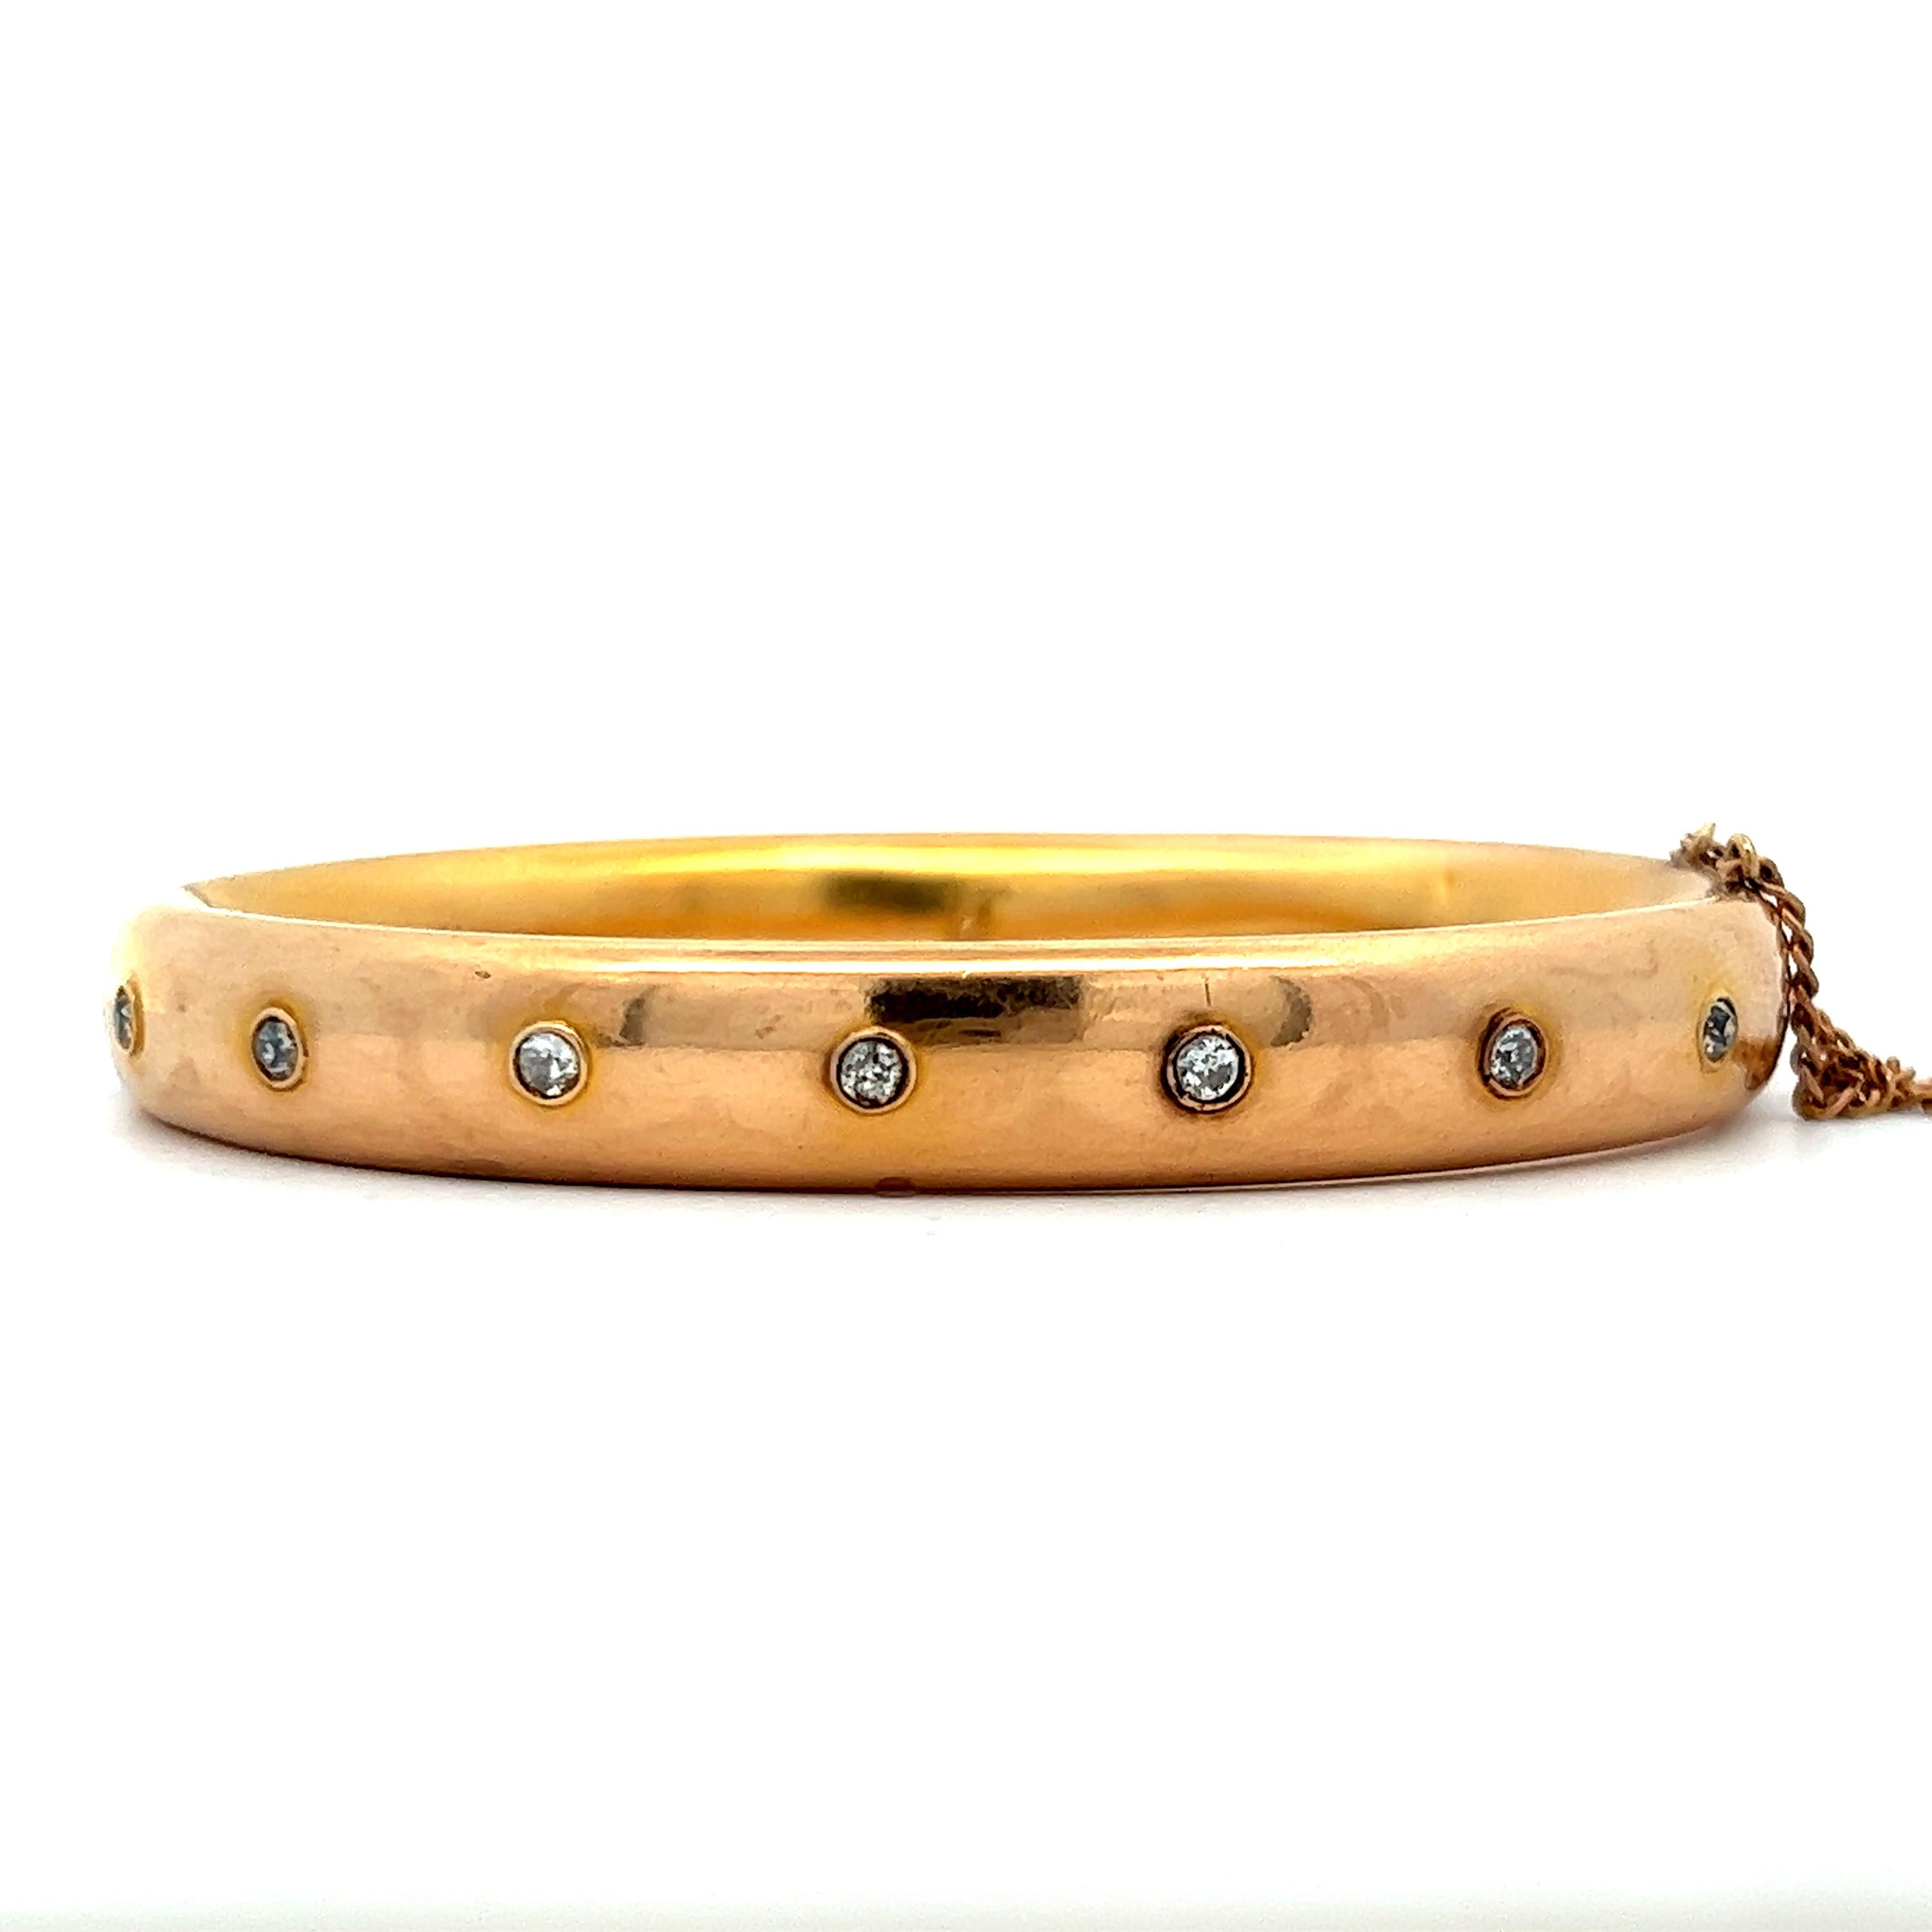 This stunning Victorian bracelet is made in 14k yellow gold with diamonds. The bracelet features a hinged bangle design with a clasp and chain to ensure a secure and comfortable fit. The bangle features .5 cttw of diamonds studded throughout the